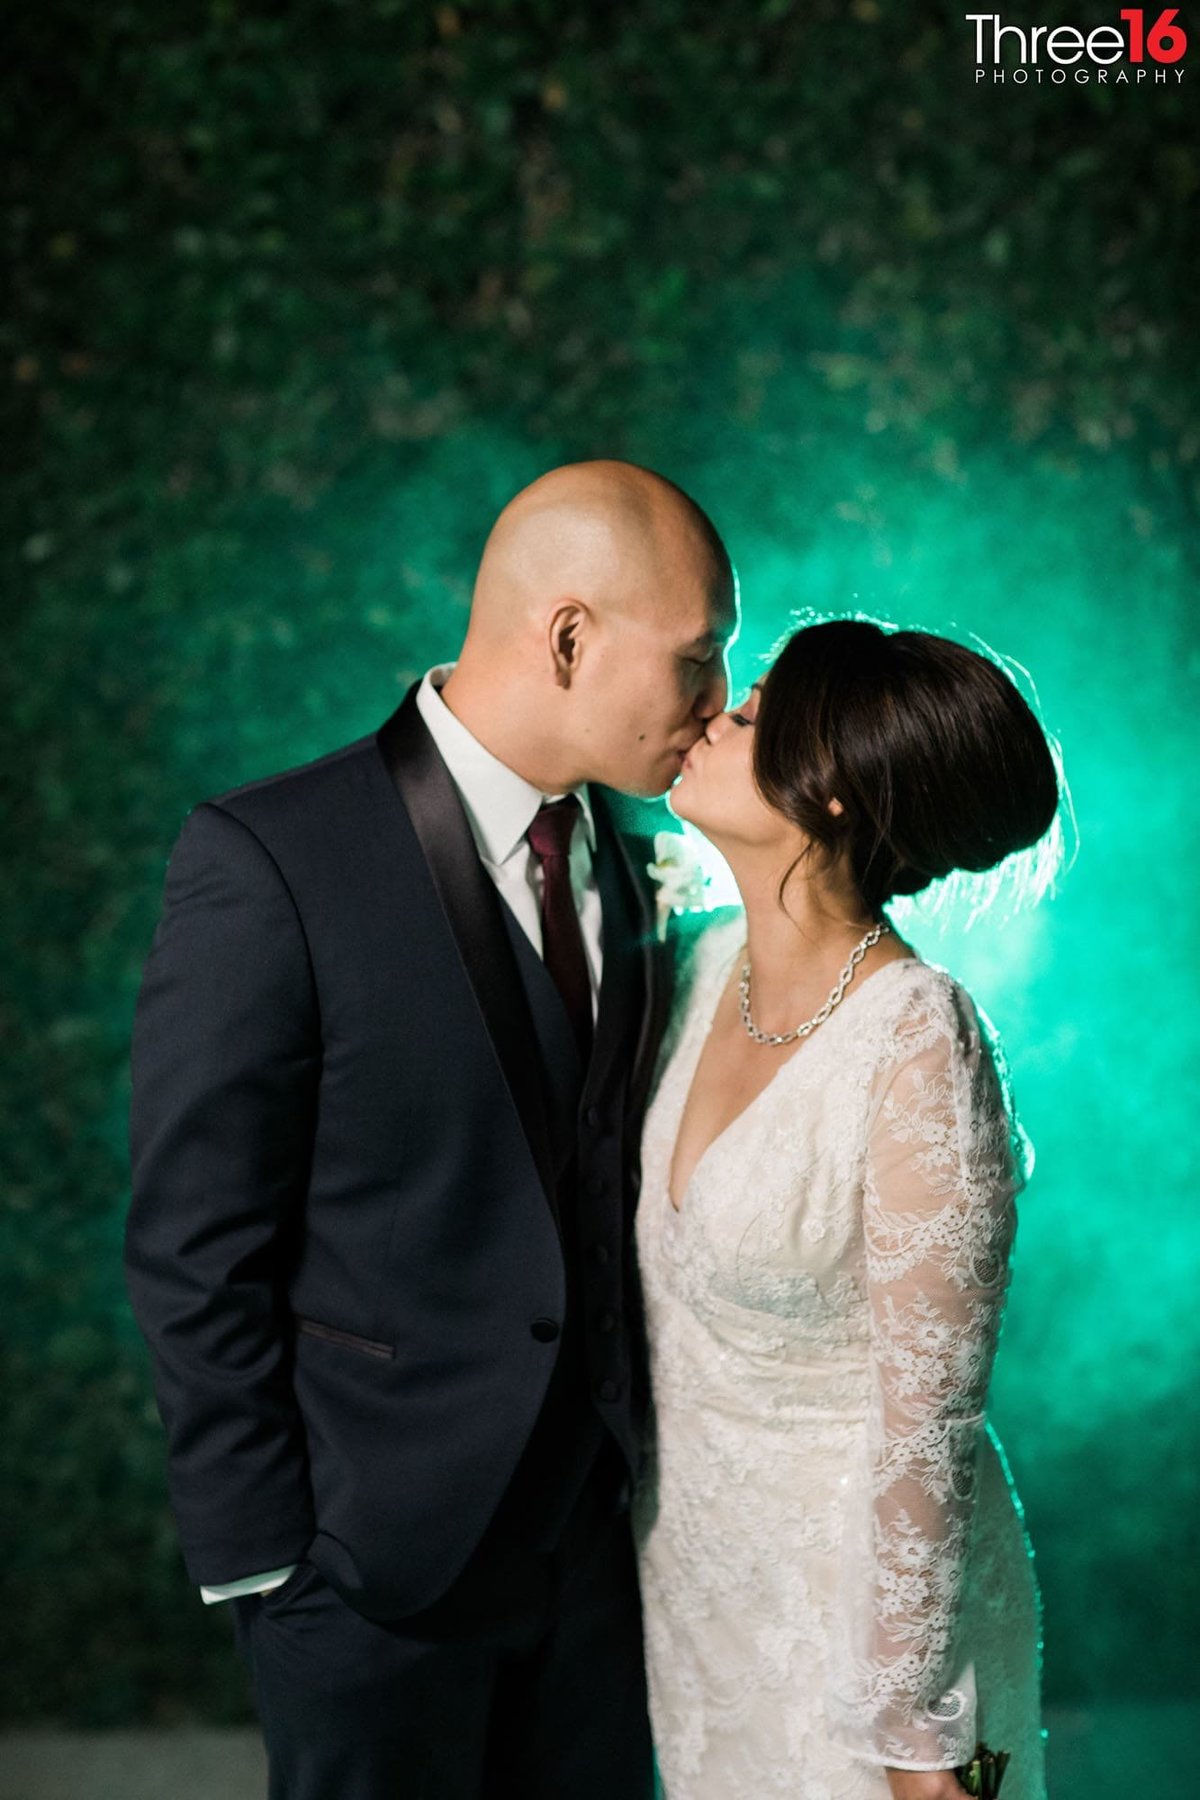 Bride and Groom share a sweet kiss at night with a greenish mist appears behind them